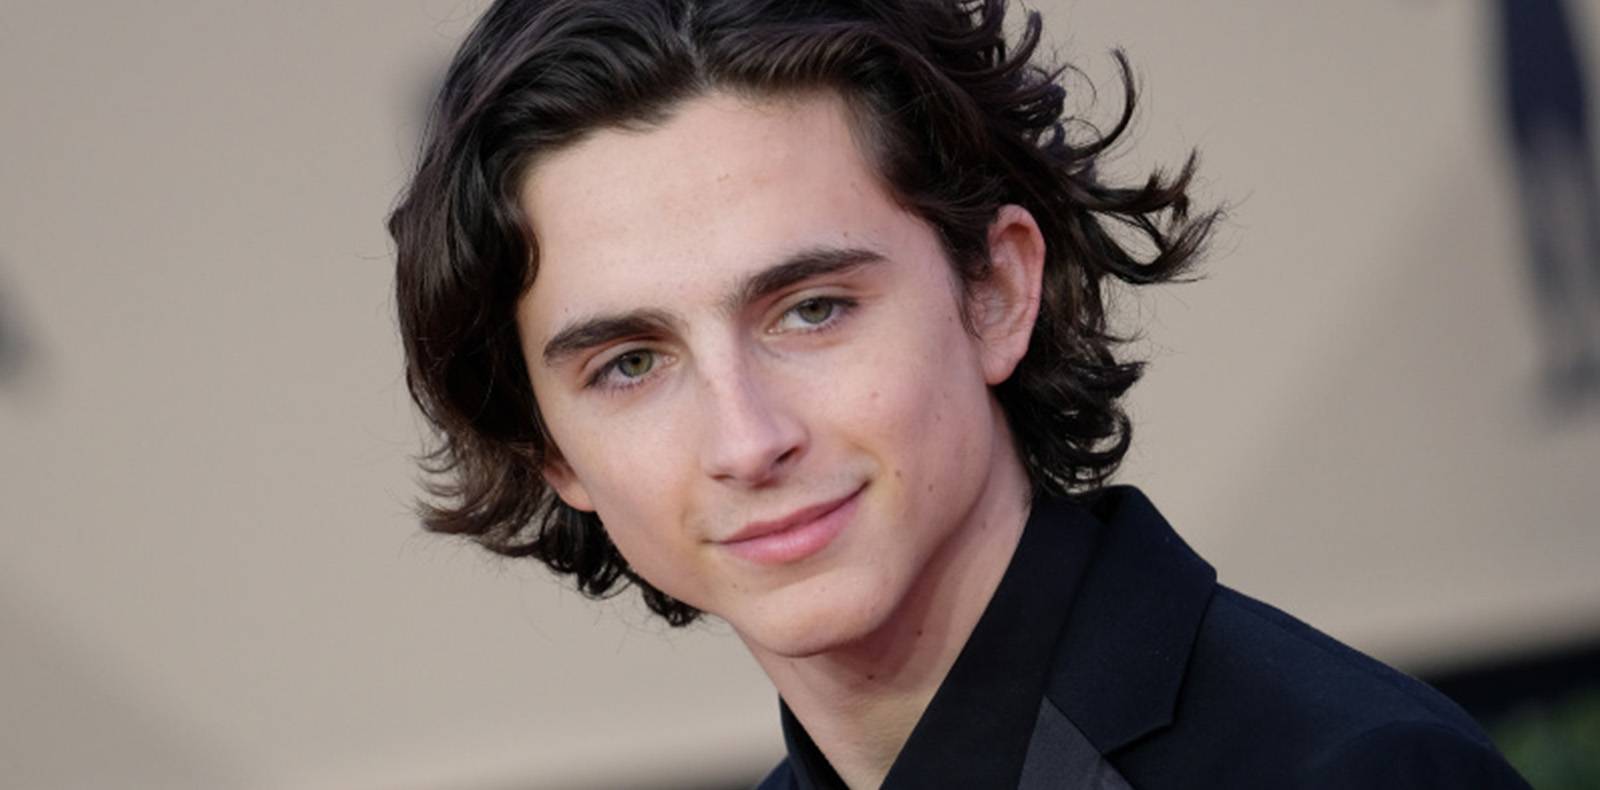 After Johnny Depp, Timothée Chalamet will be the next Willy Wonka